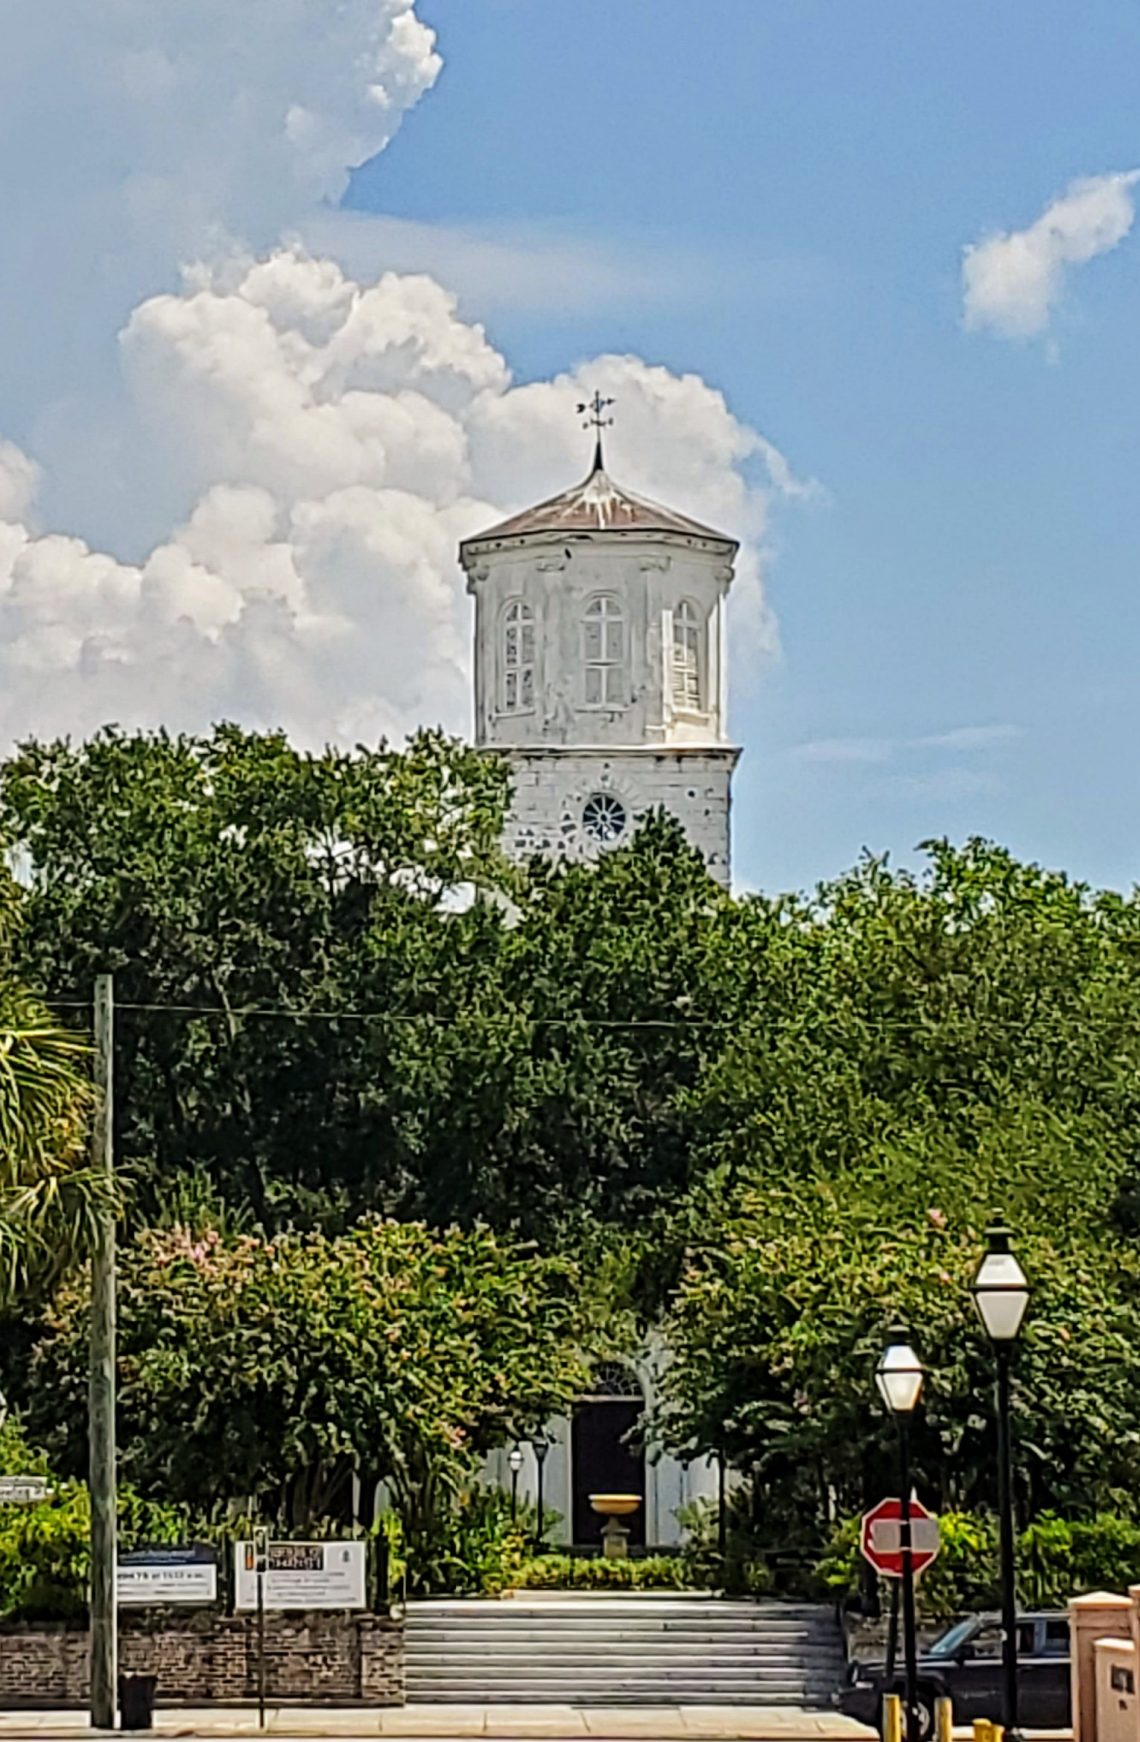 The fourth oldest church in Charleston (1811), Second Presbyterian on Meeting Street, has a distinctive steeple.